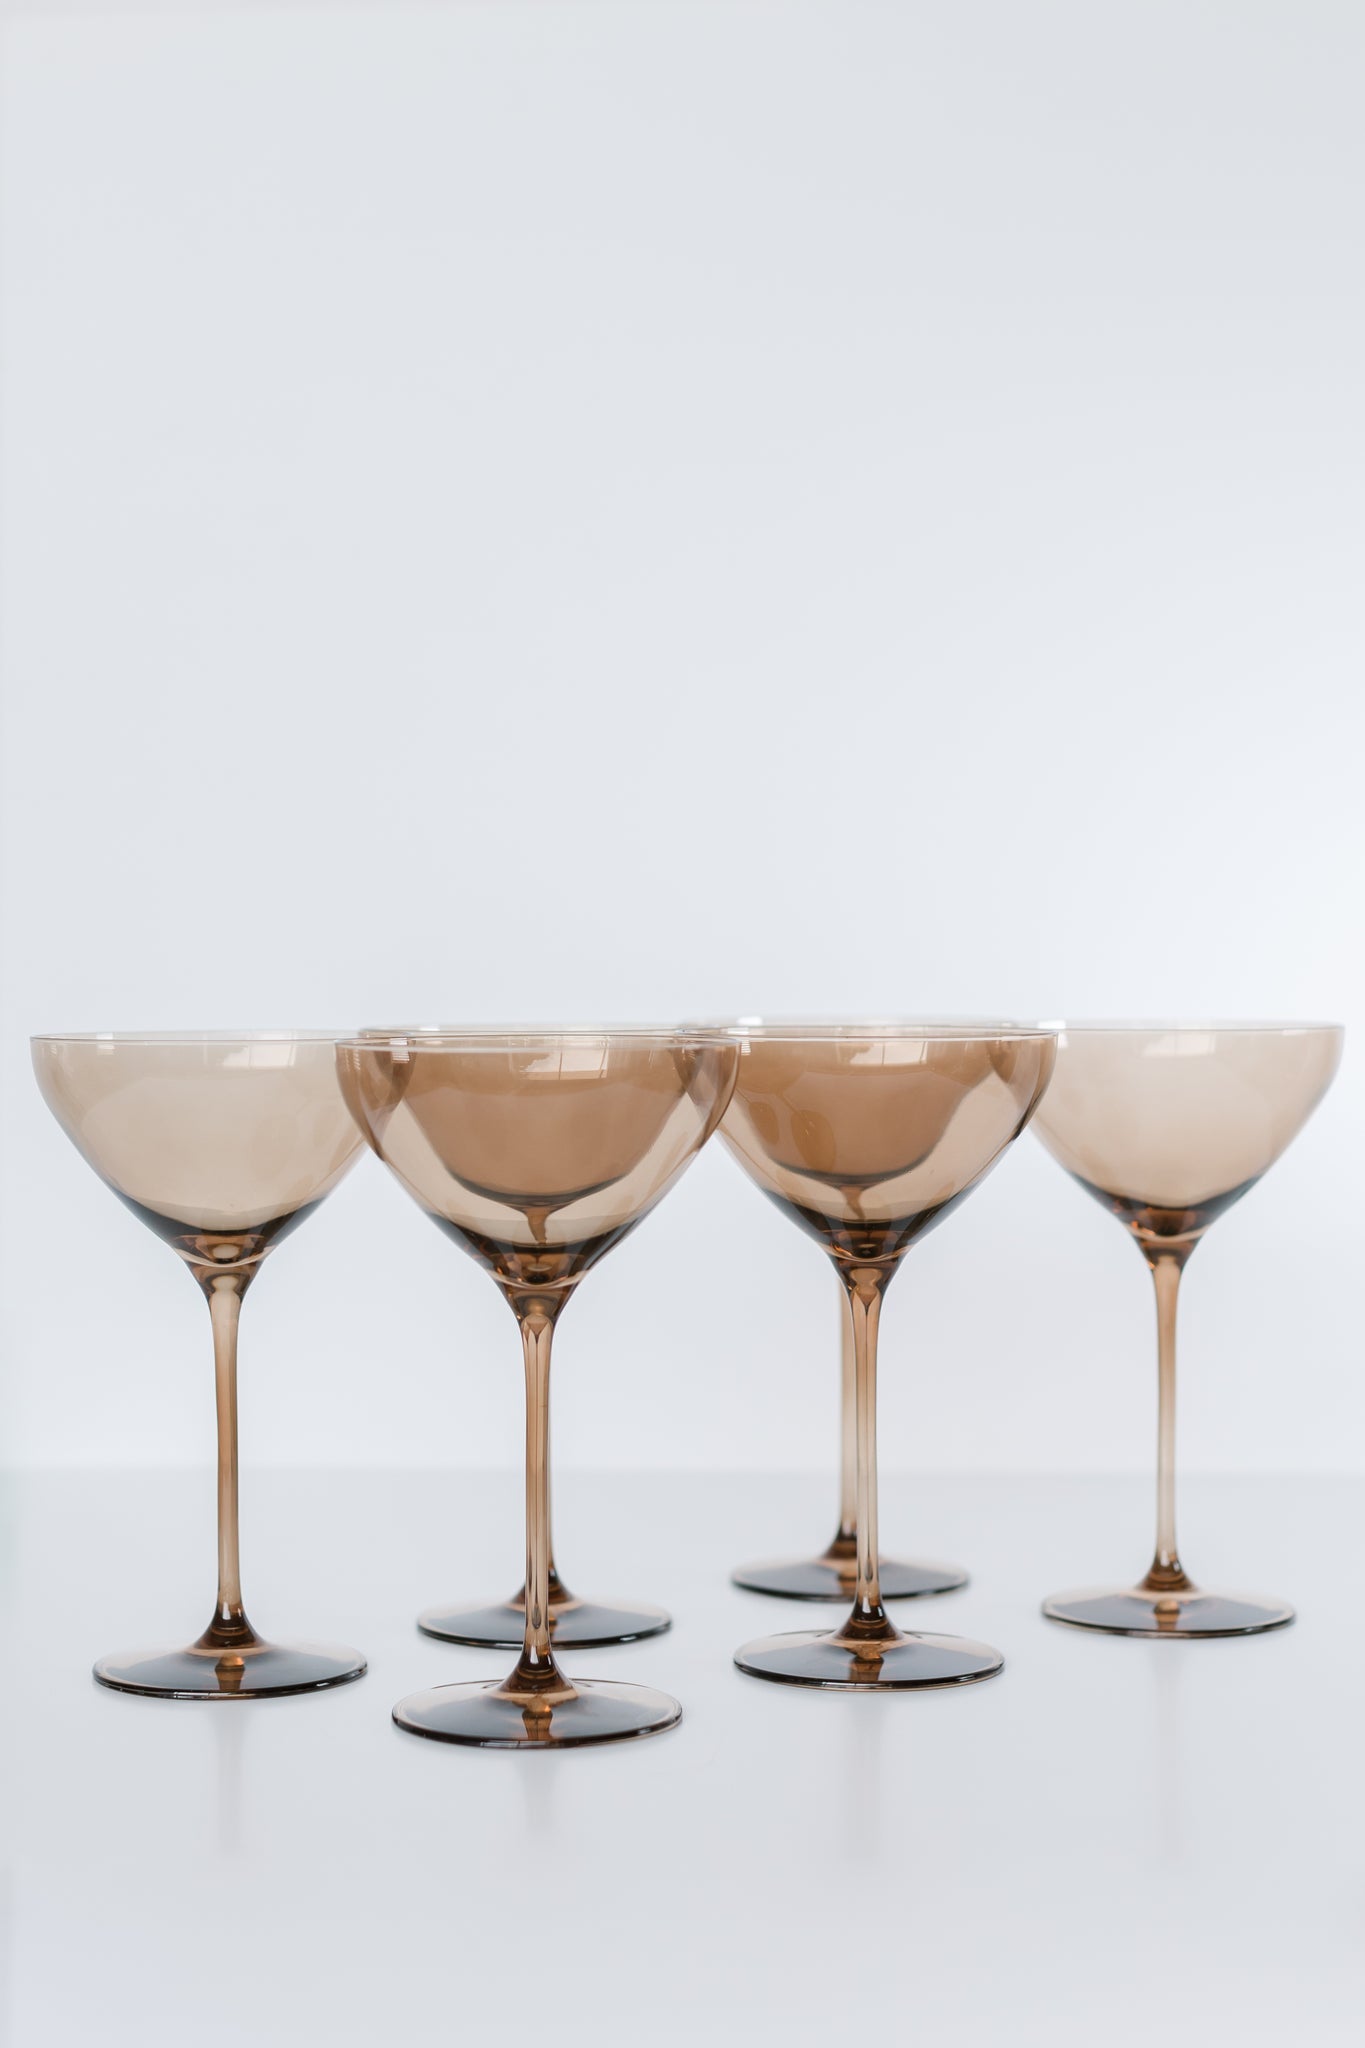 Load image into Gallery viewer, Estelle Martini Amber Smoke Glasses - Set of 6
